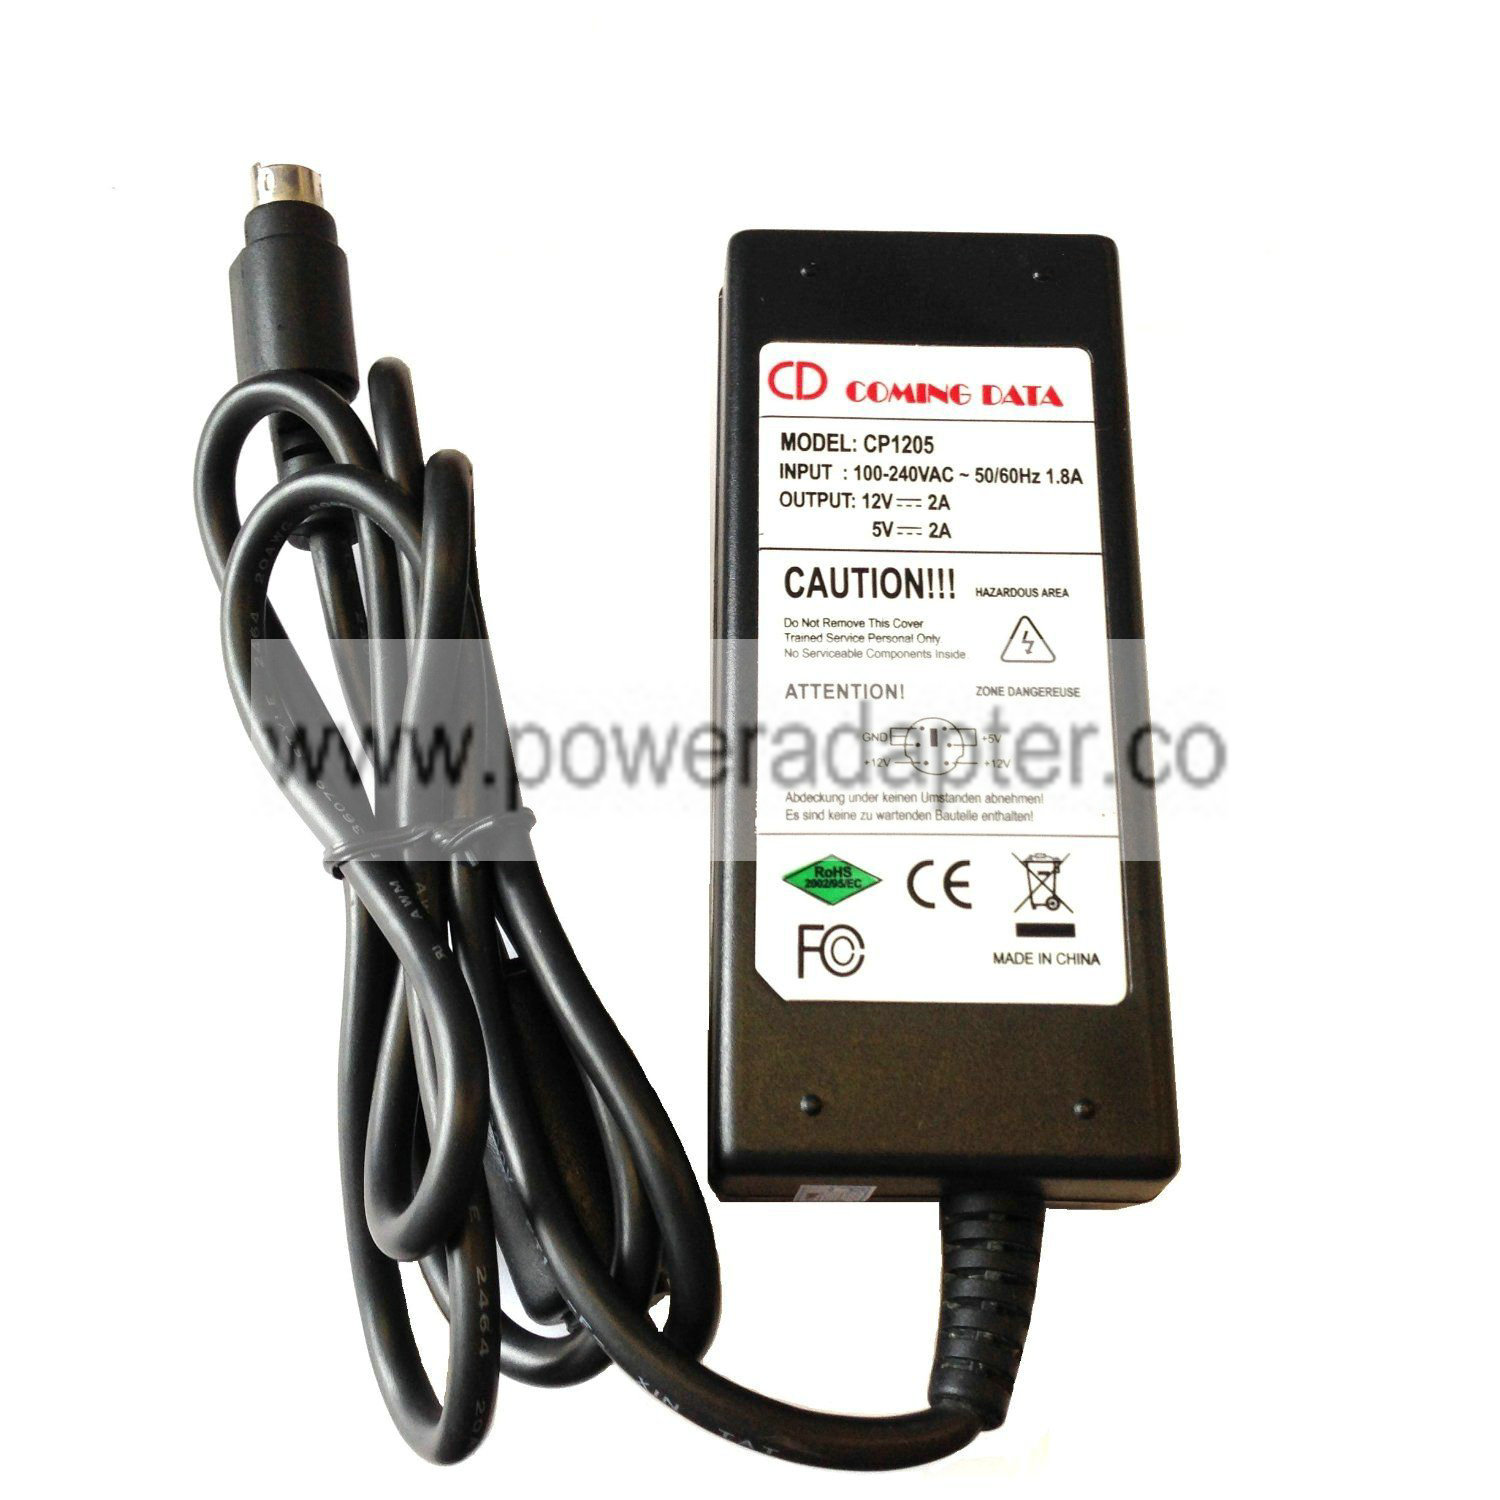 GENUINE ORIGINAL COMING DATA CP1205 POWER SUPPLY ADAPTER 12V 2A 5V 2A 6 PIN DIN WE ARE PROFESSIONAL SELLERS AND PROVIDE - Click Image to Close